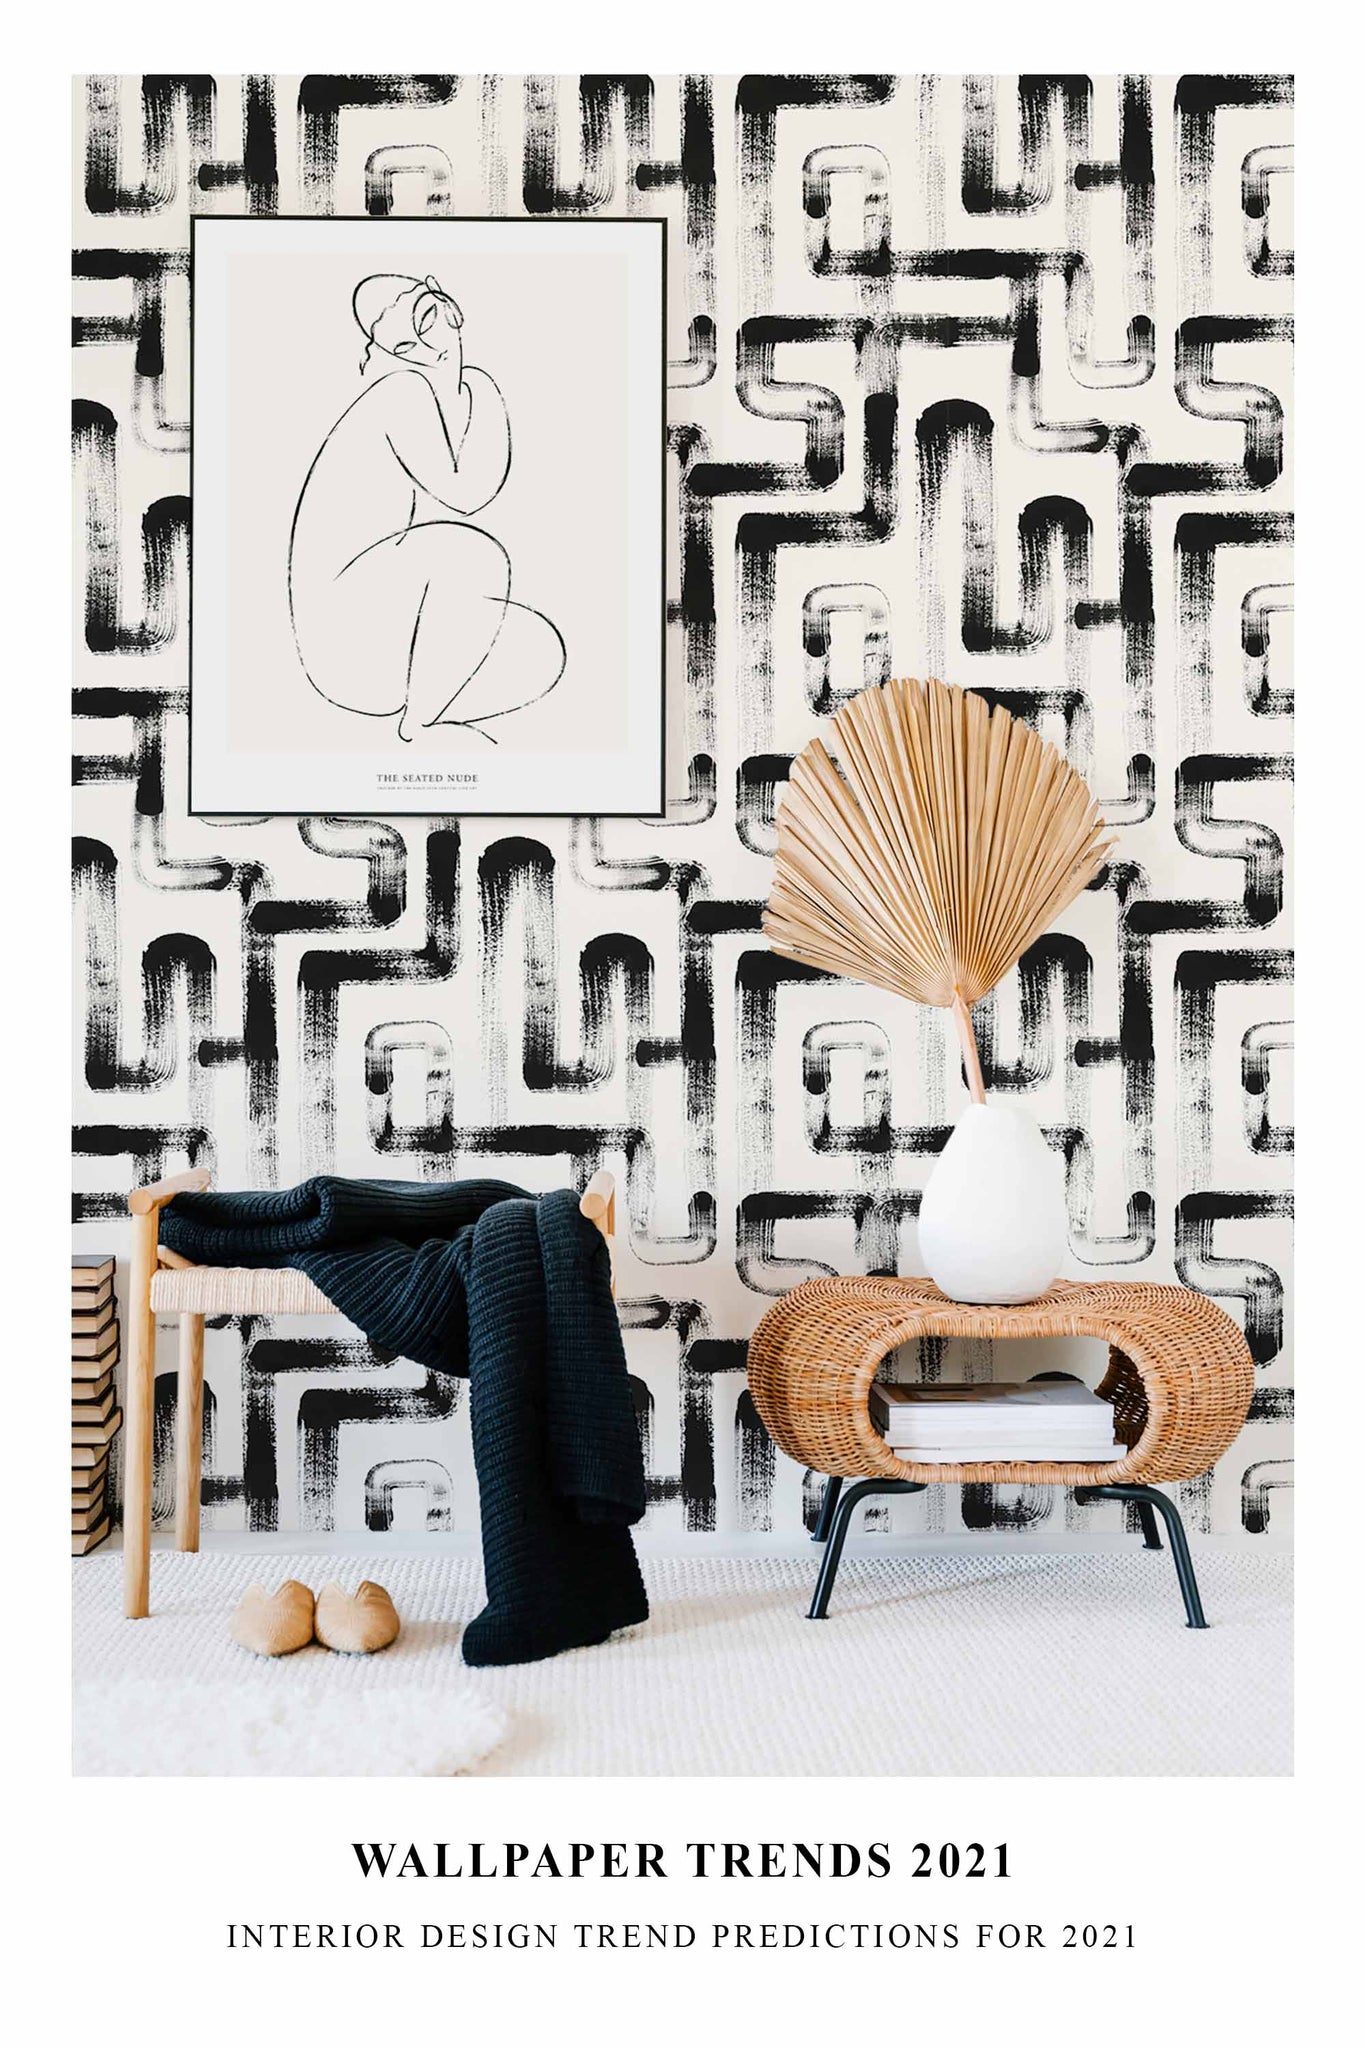 Modern removable wallpaper trends in 2021